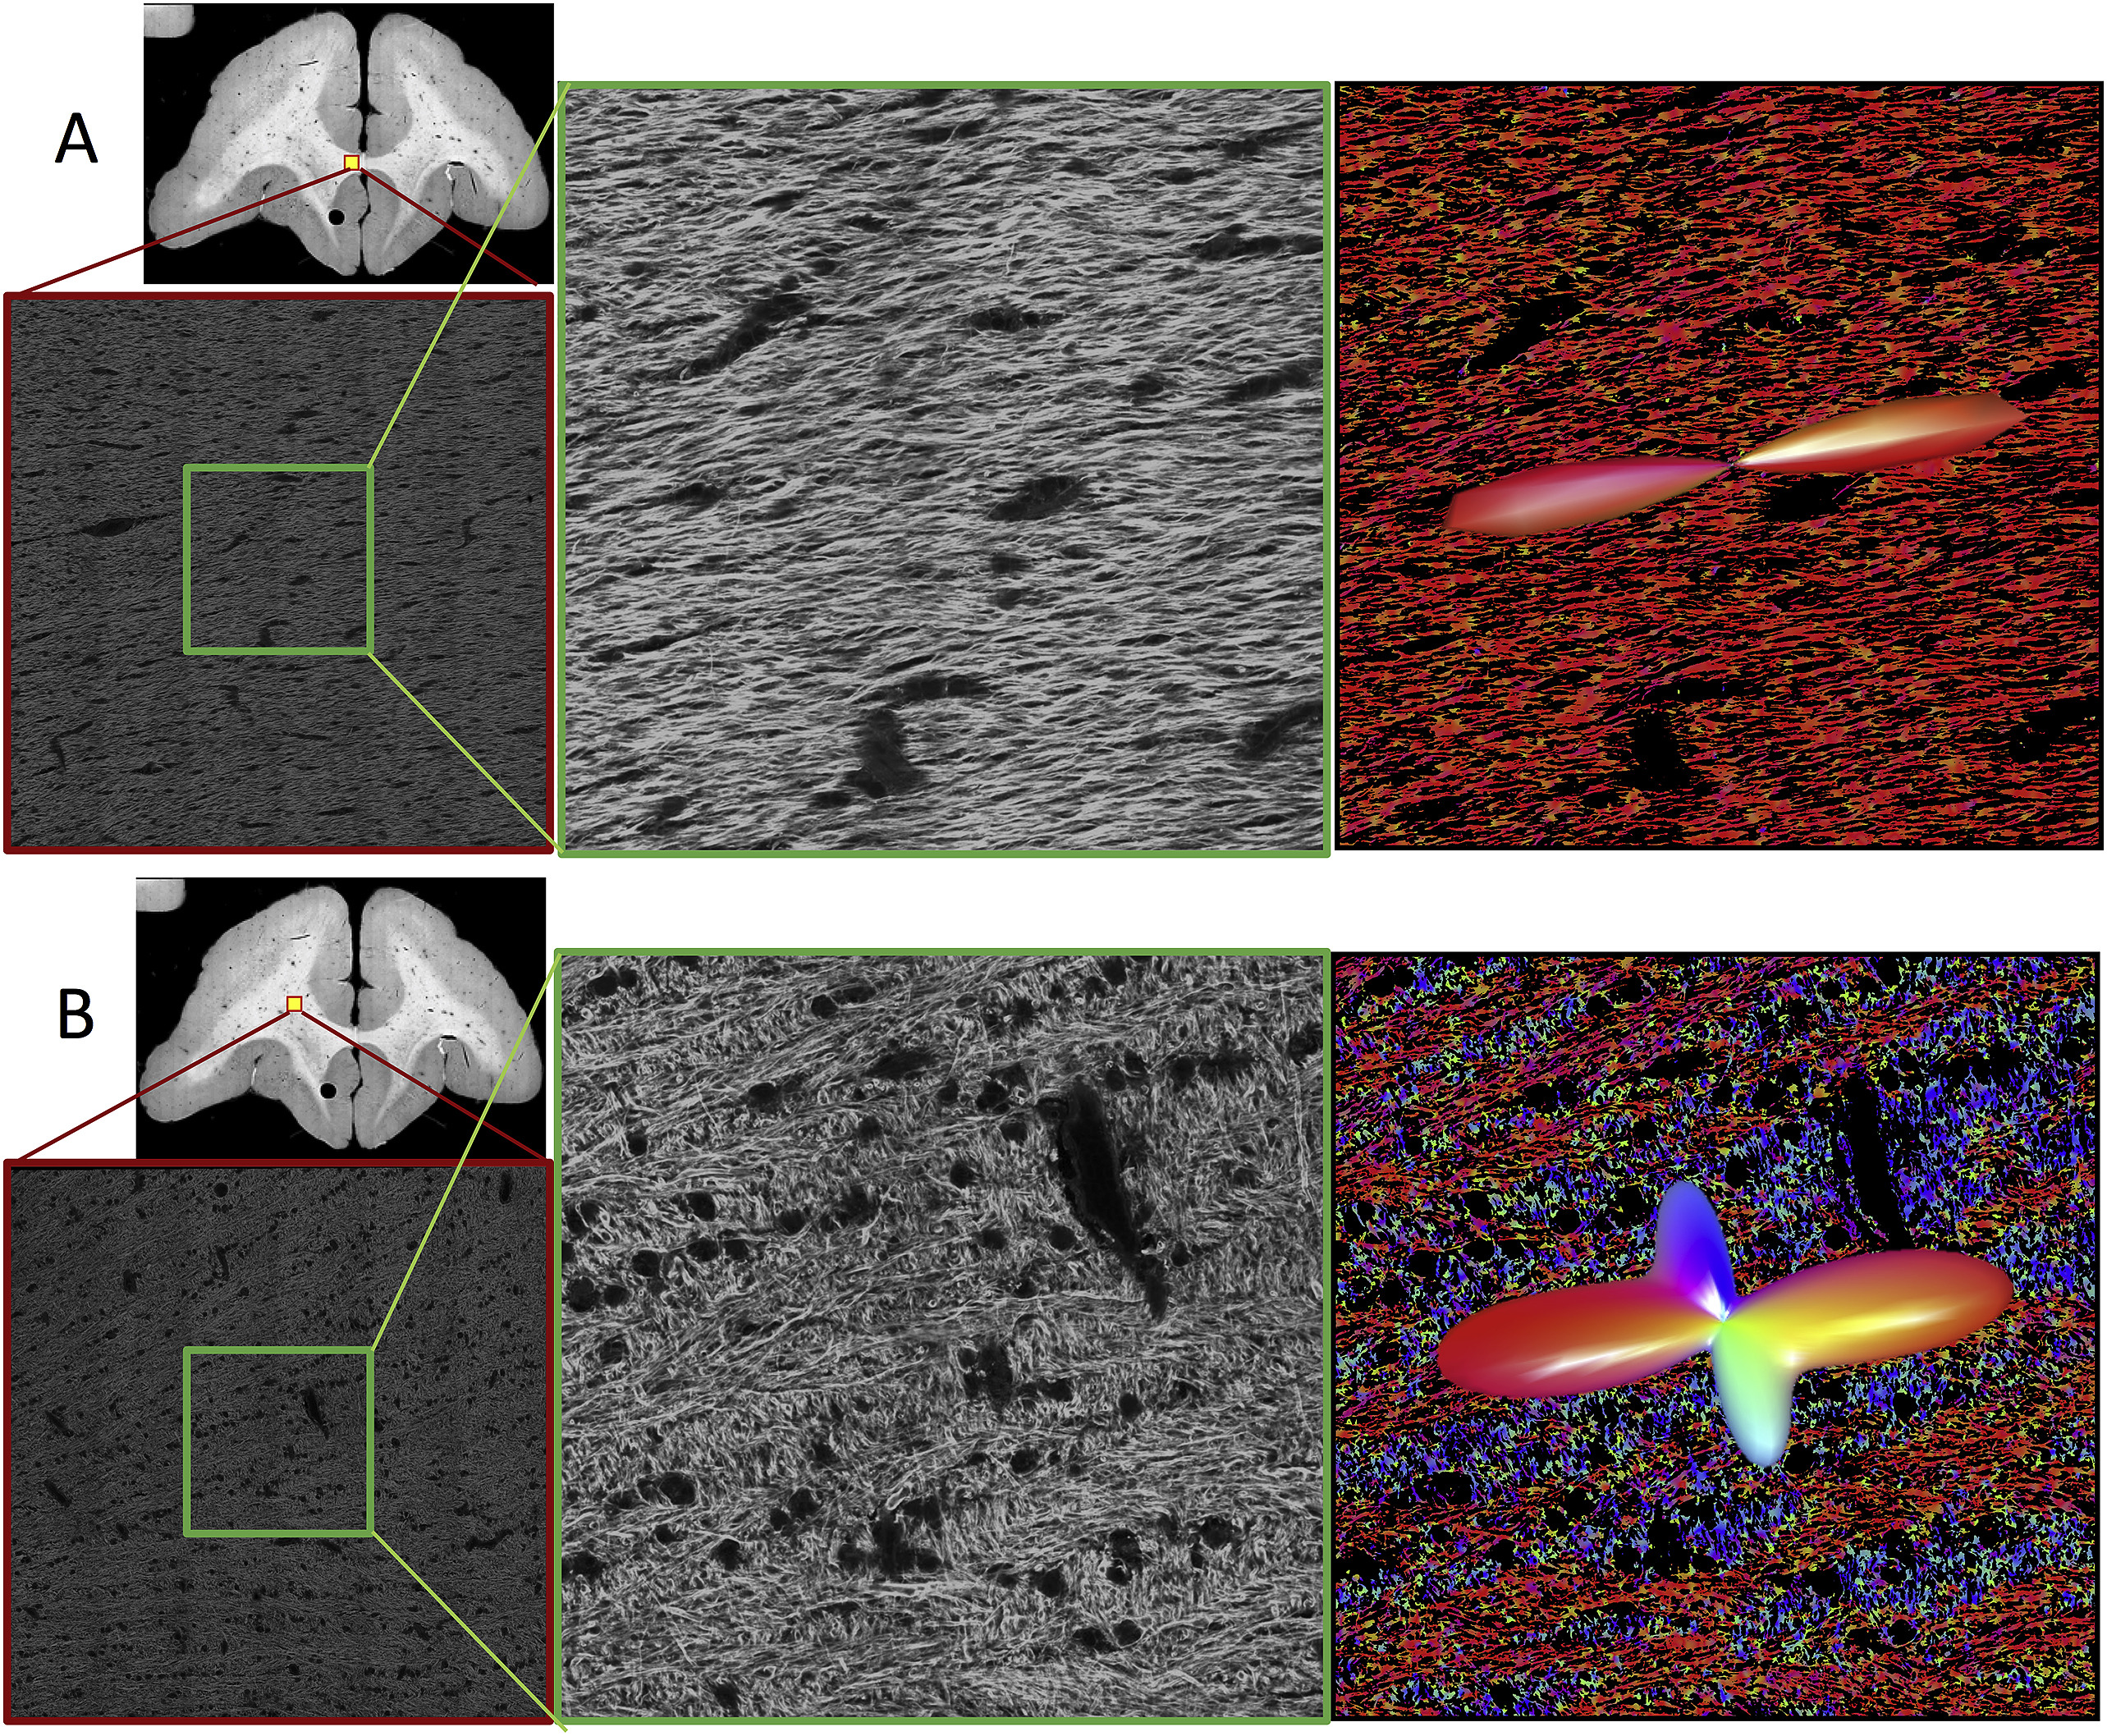 Qualitative confocal images. Representative confocal data (of a single slice) are shown for single (A) and crossing (B) fiber regions. Overview images highlight location of full 3D z-stacks (shown as a single, middle slice). A zoomed regions of interest in the middle of the z-stack (equivalent in size to an MRI voxel) are shown in the middle column. Results from structure tensor analysis are shown as color-coded images (with colors scheme as described in Fig. 1), with the histologically-defined FOD overlaid as 3D glyphs (right).